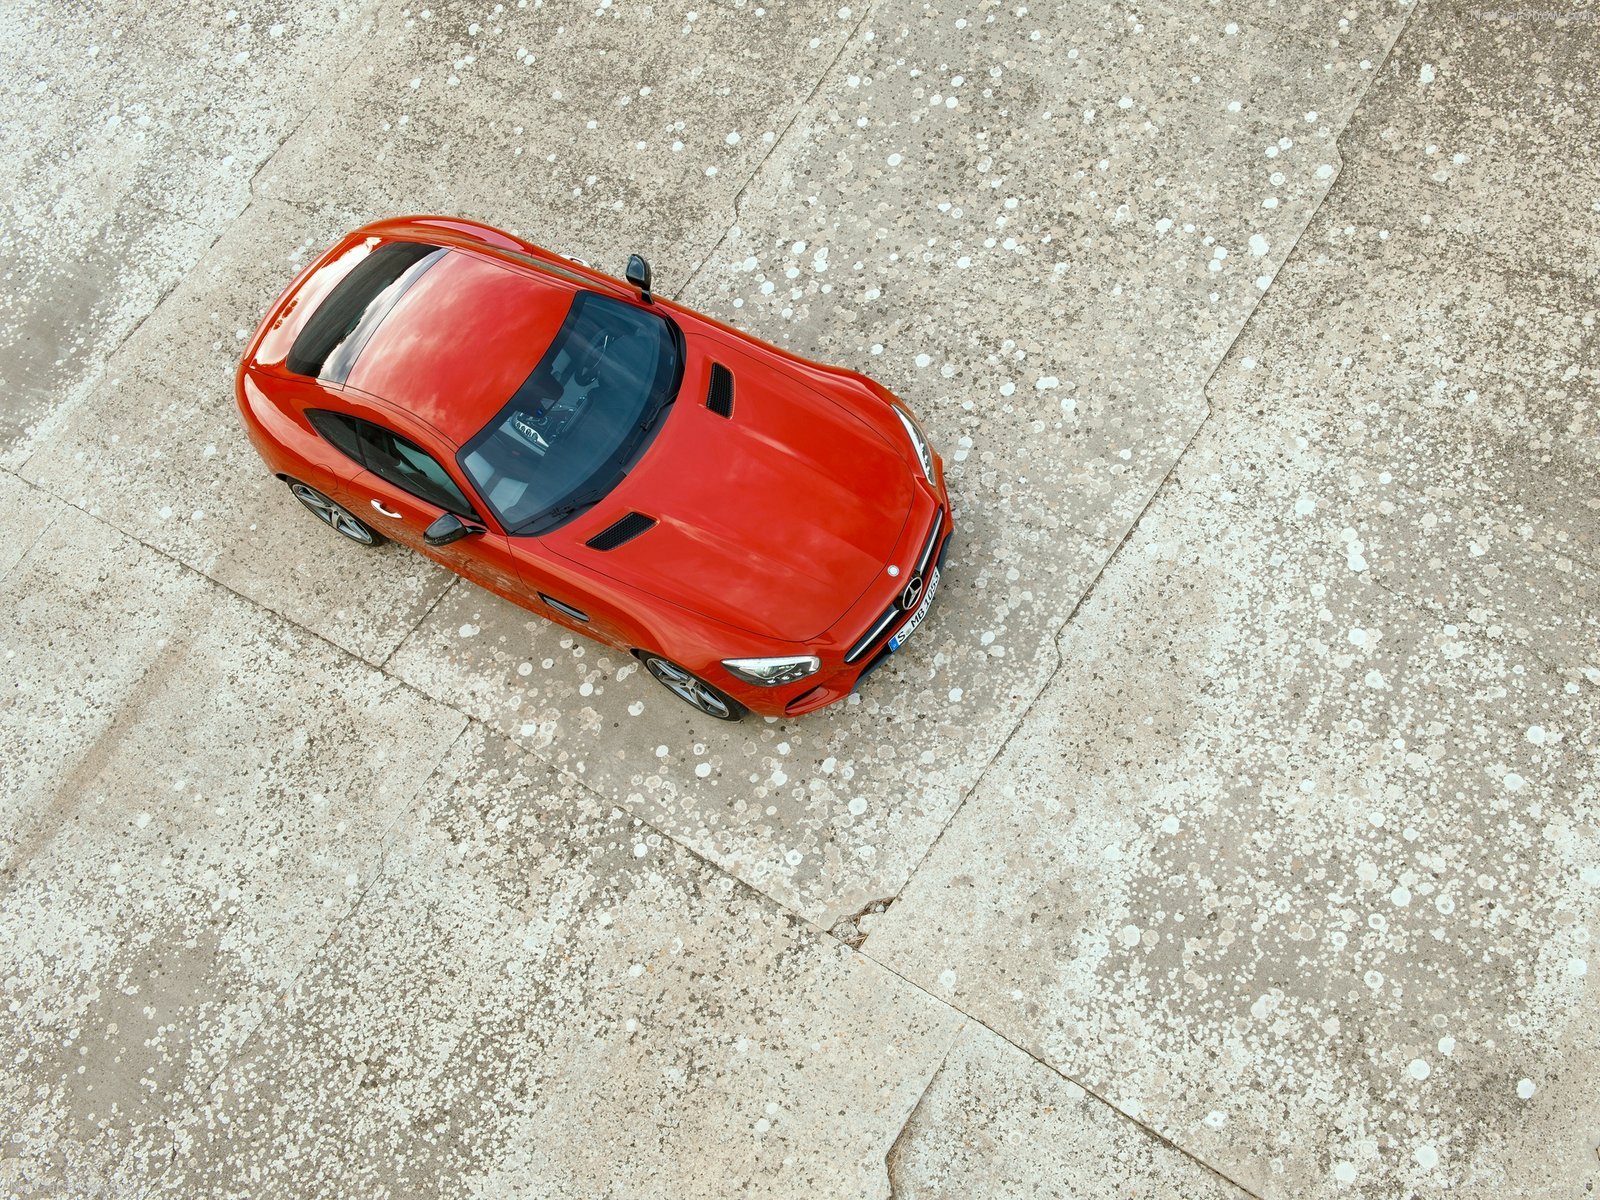 mercedes, Benz, Amg, Gt, Coupe, Cars, 2015, Germany, Red, Rouge Wallpaper